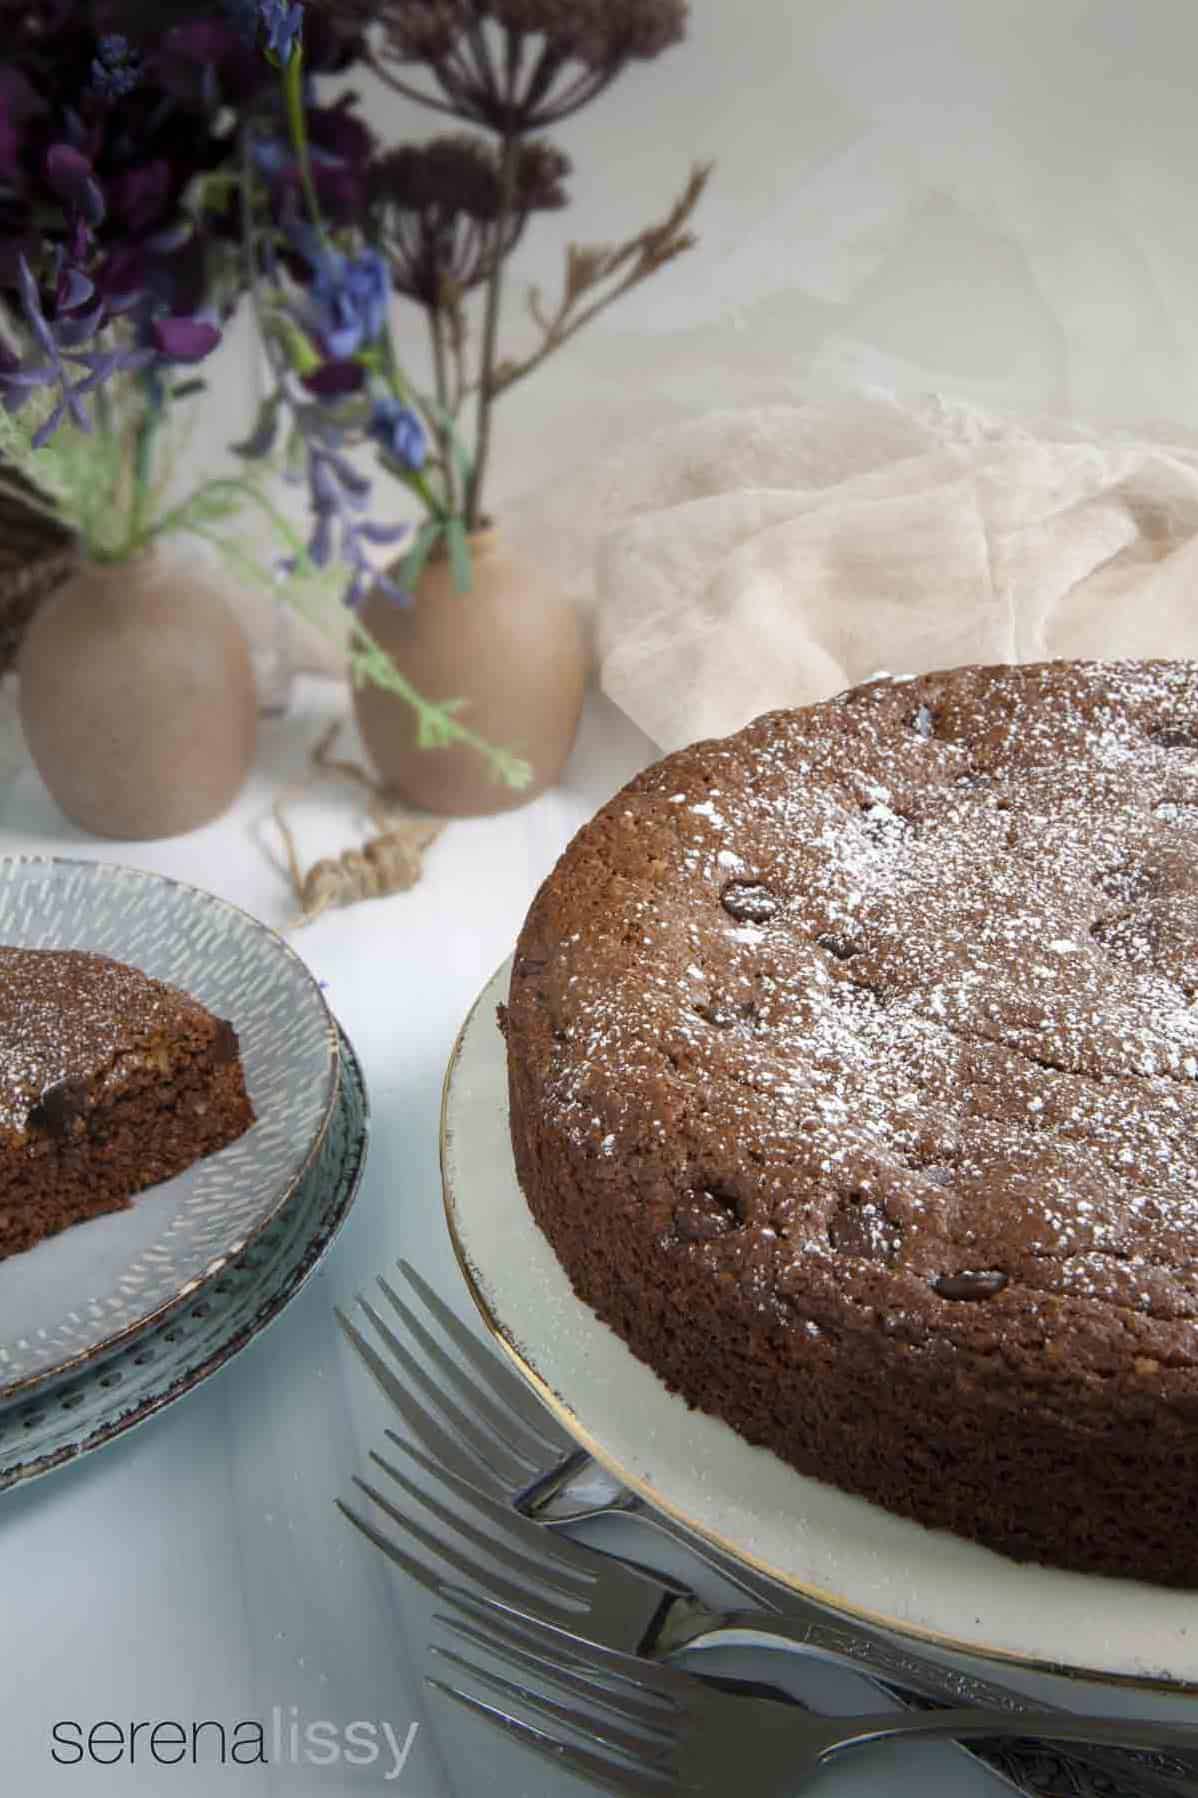  Topped with a generous amount of toasted walnuts, this cake is sure to impress your guests.